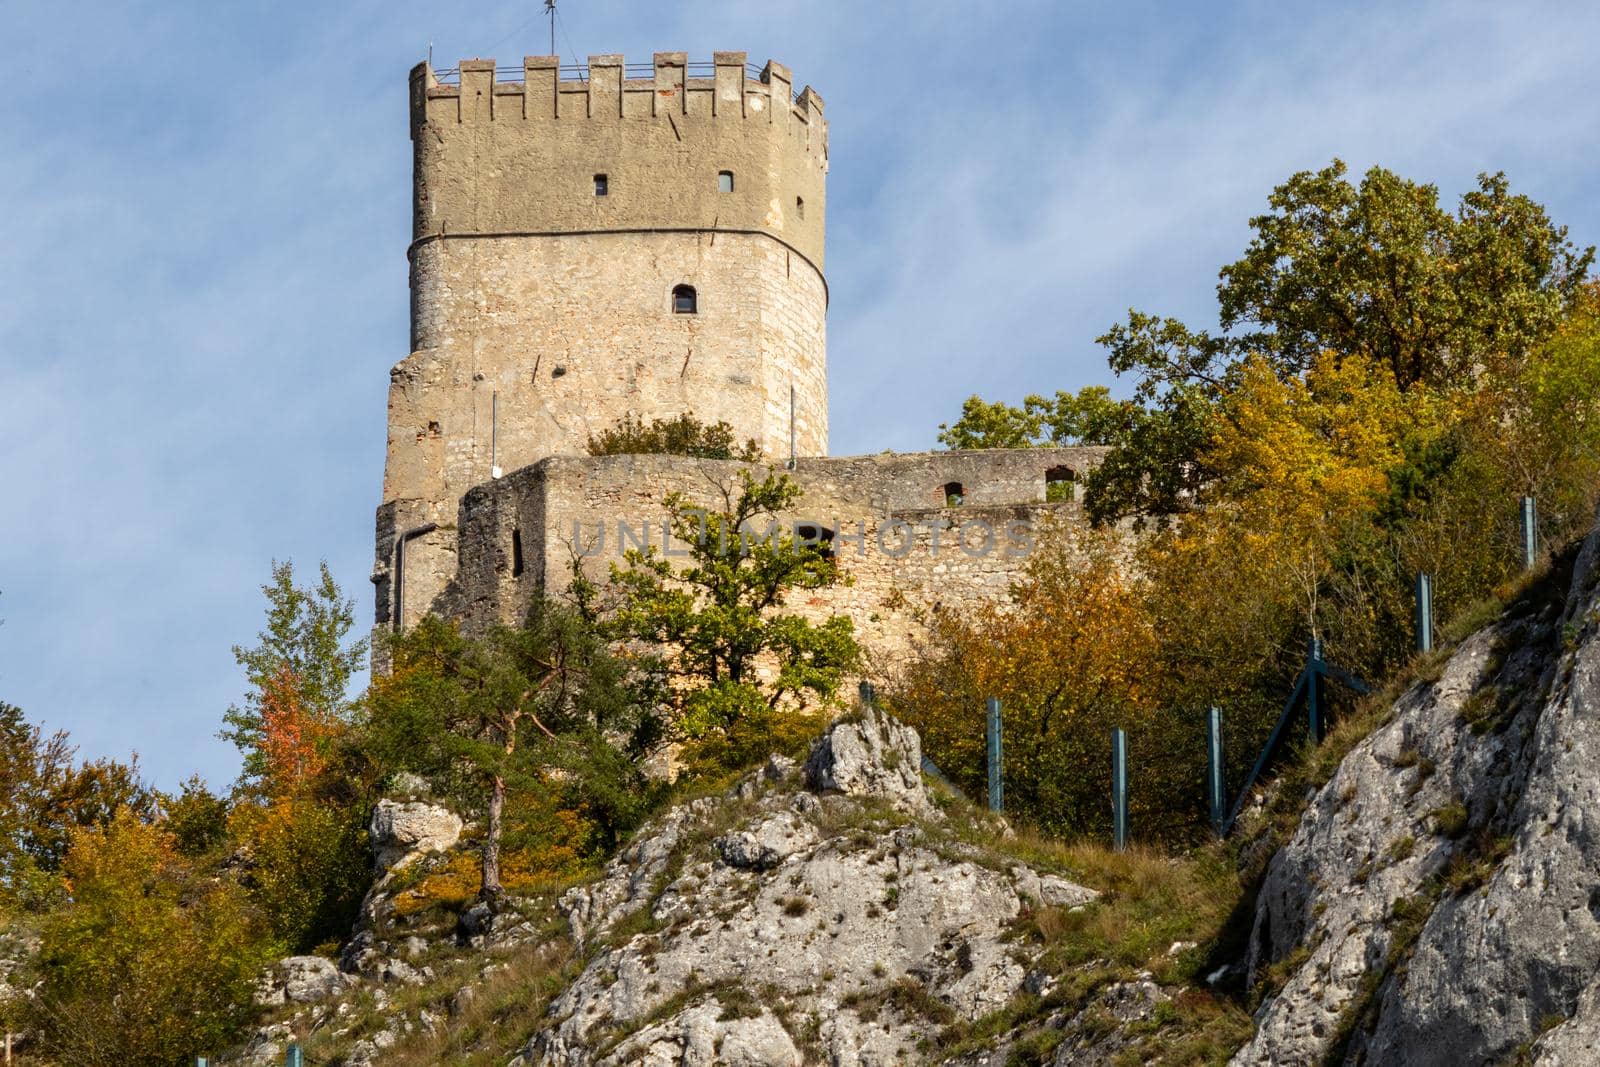 The ruin of Randeck castle in Markt Essing, Bavaria, Germany in autumn with multi colored trees by reinerc